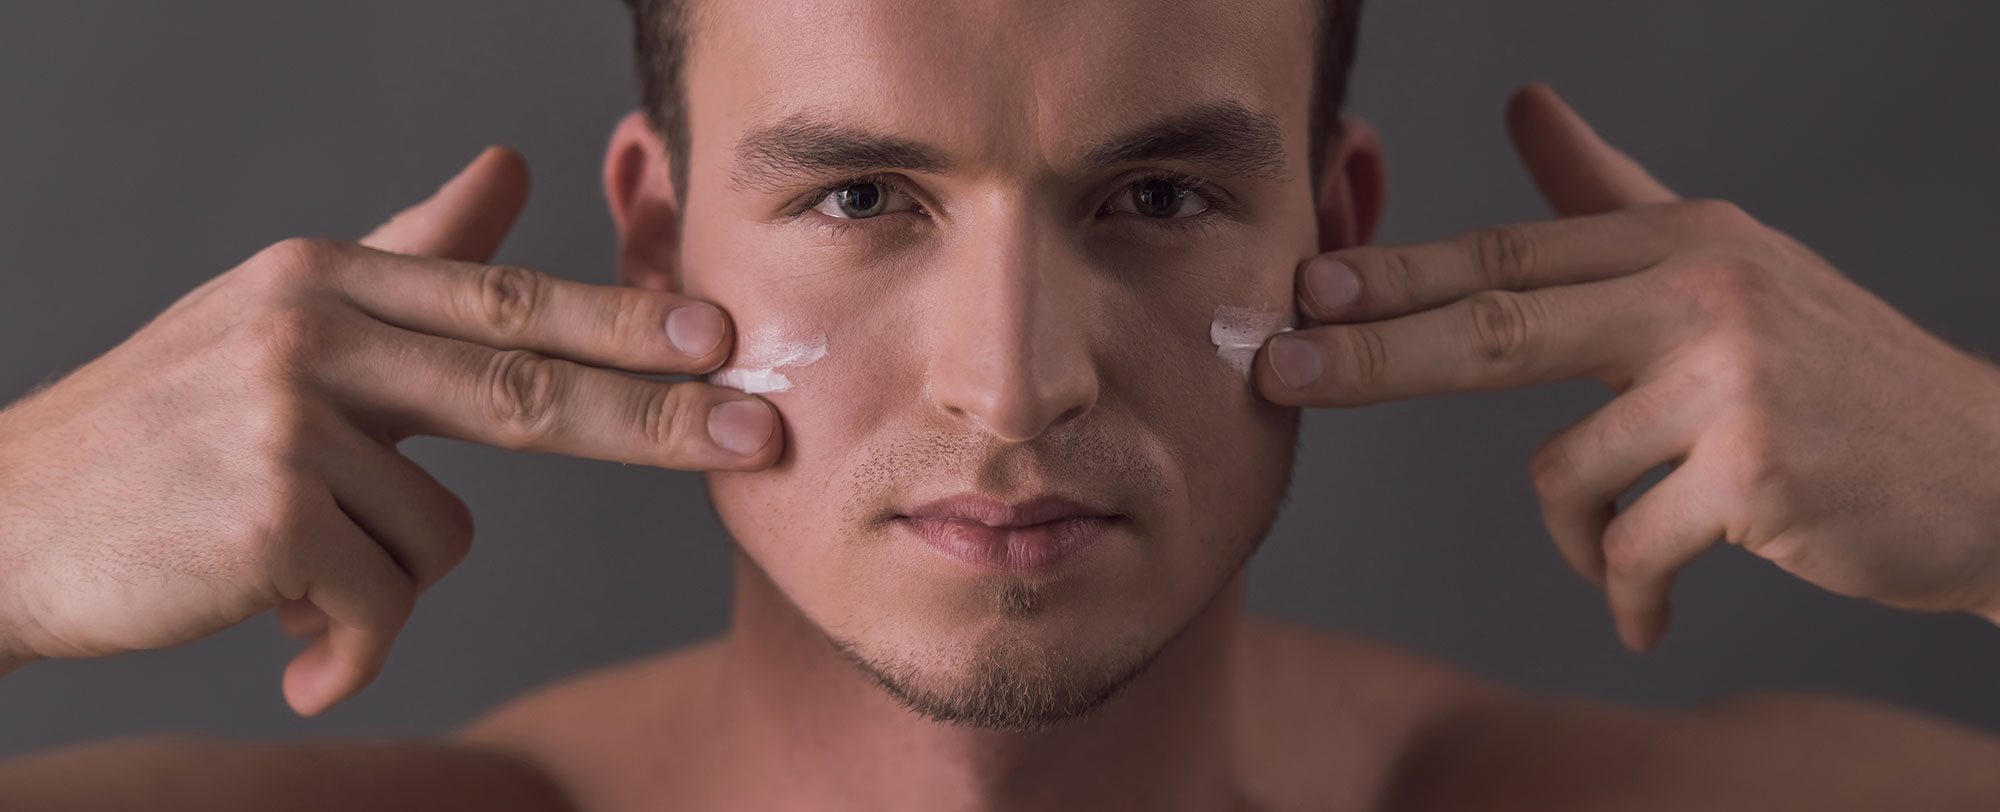 men's skincare habits and products